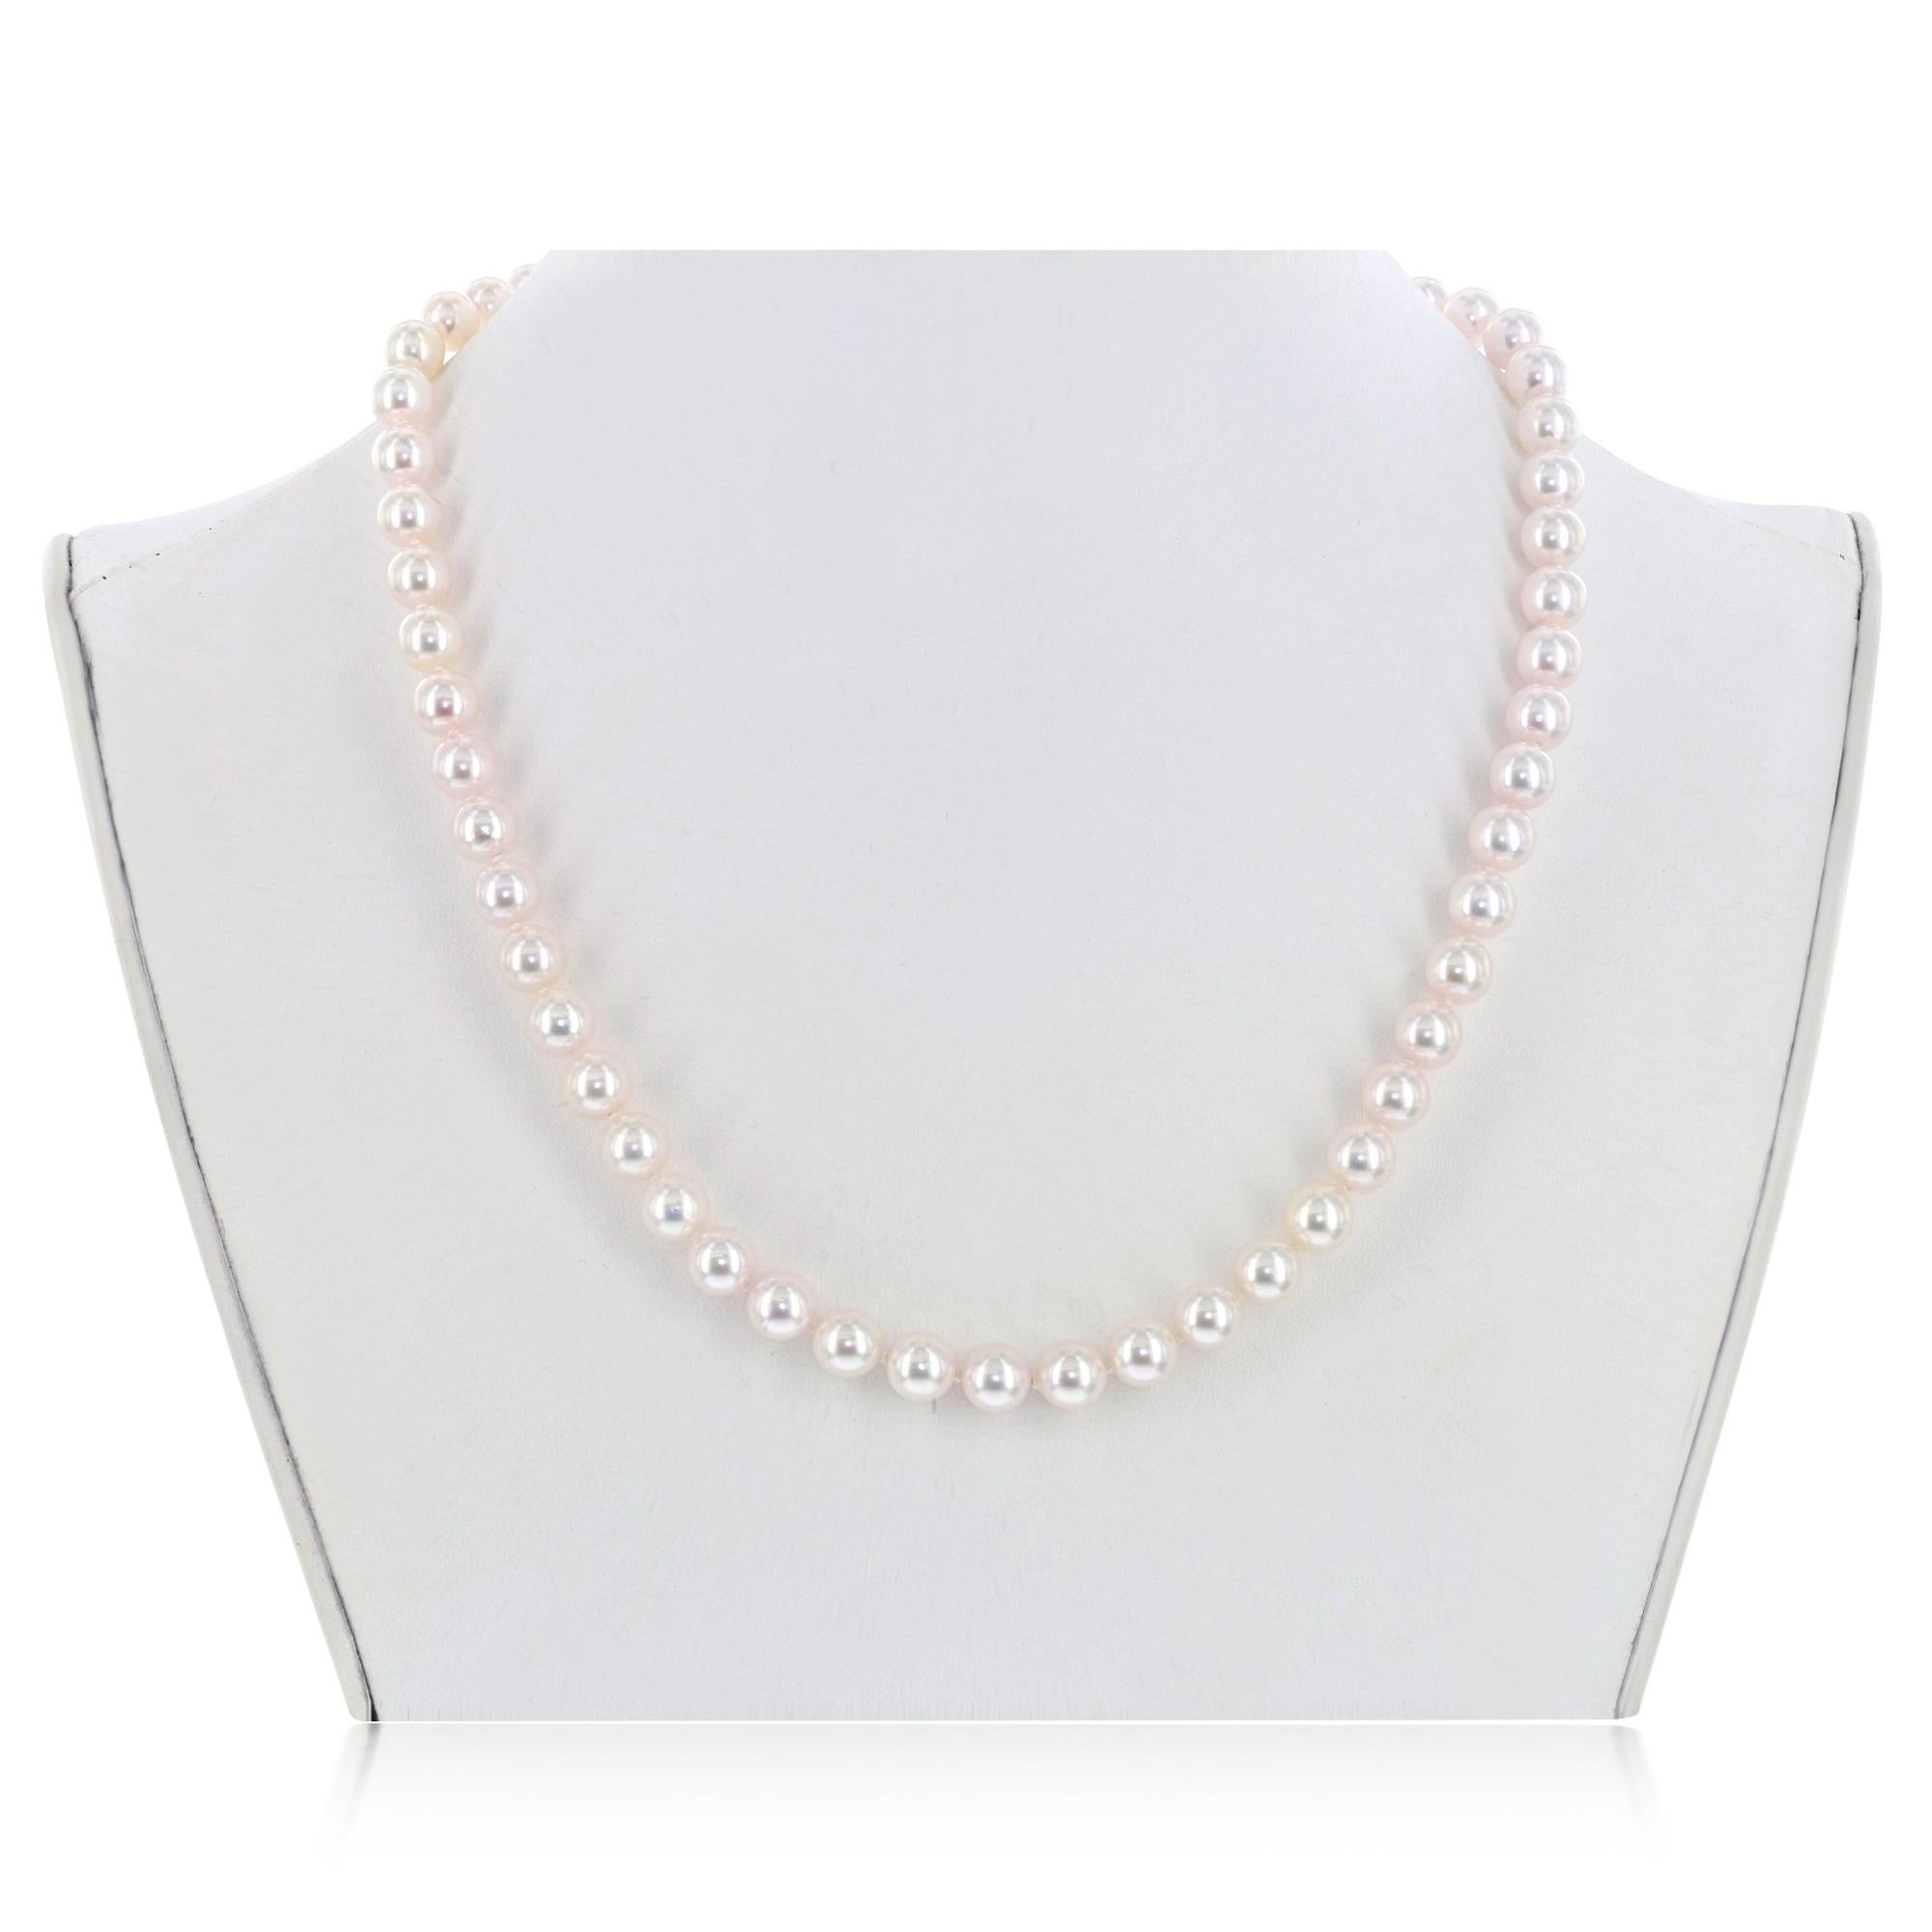 This Japanese Akoya cultured pearl necklace measures 3-3.5mm. This classic pearl necklace is strung to 18 inches with a 14K gold filigree clasp.